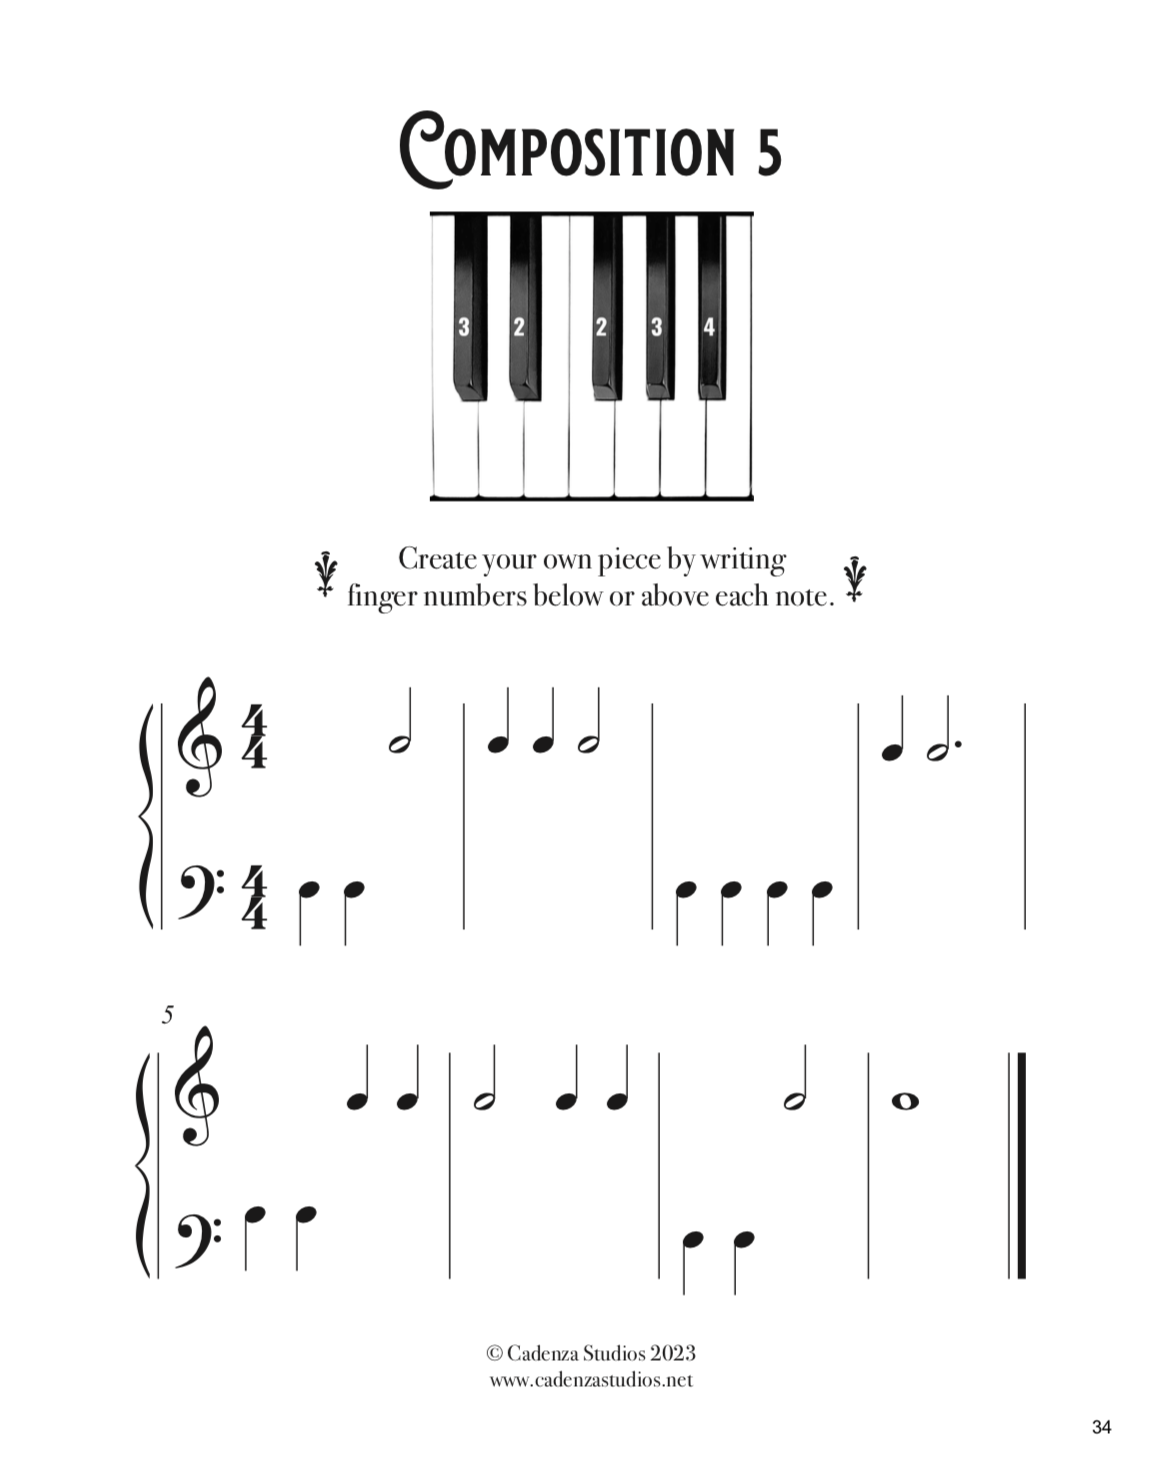 Easy Piano Game for Beginning Students in 2023